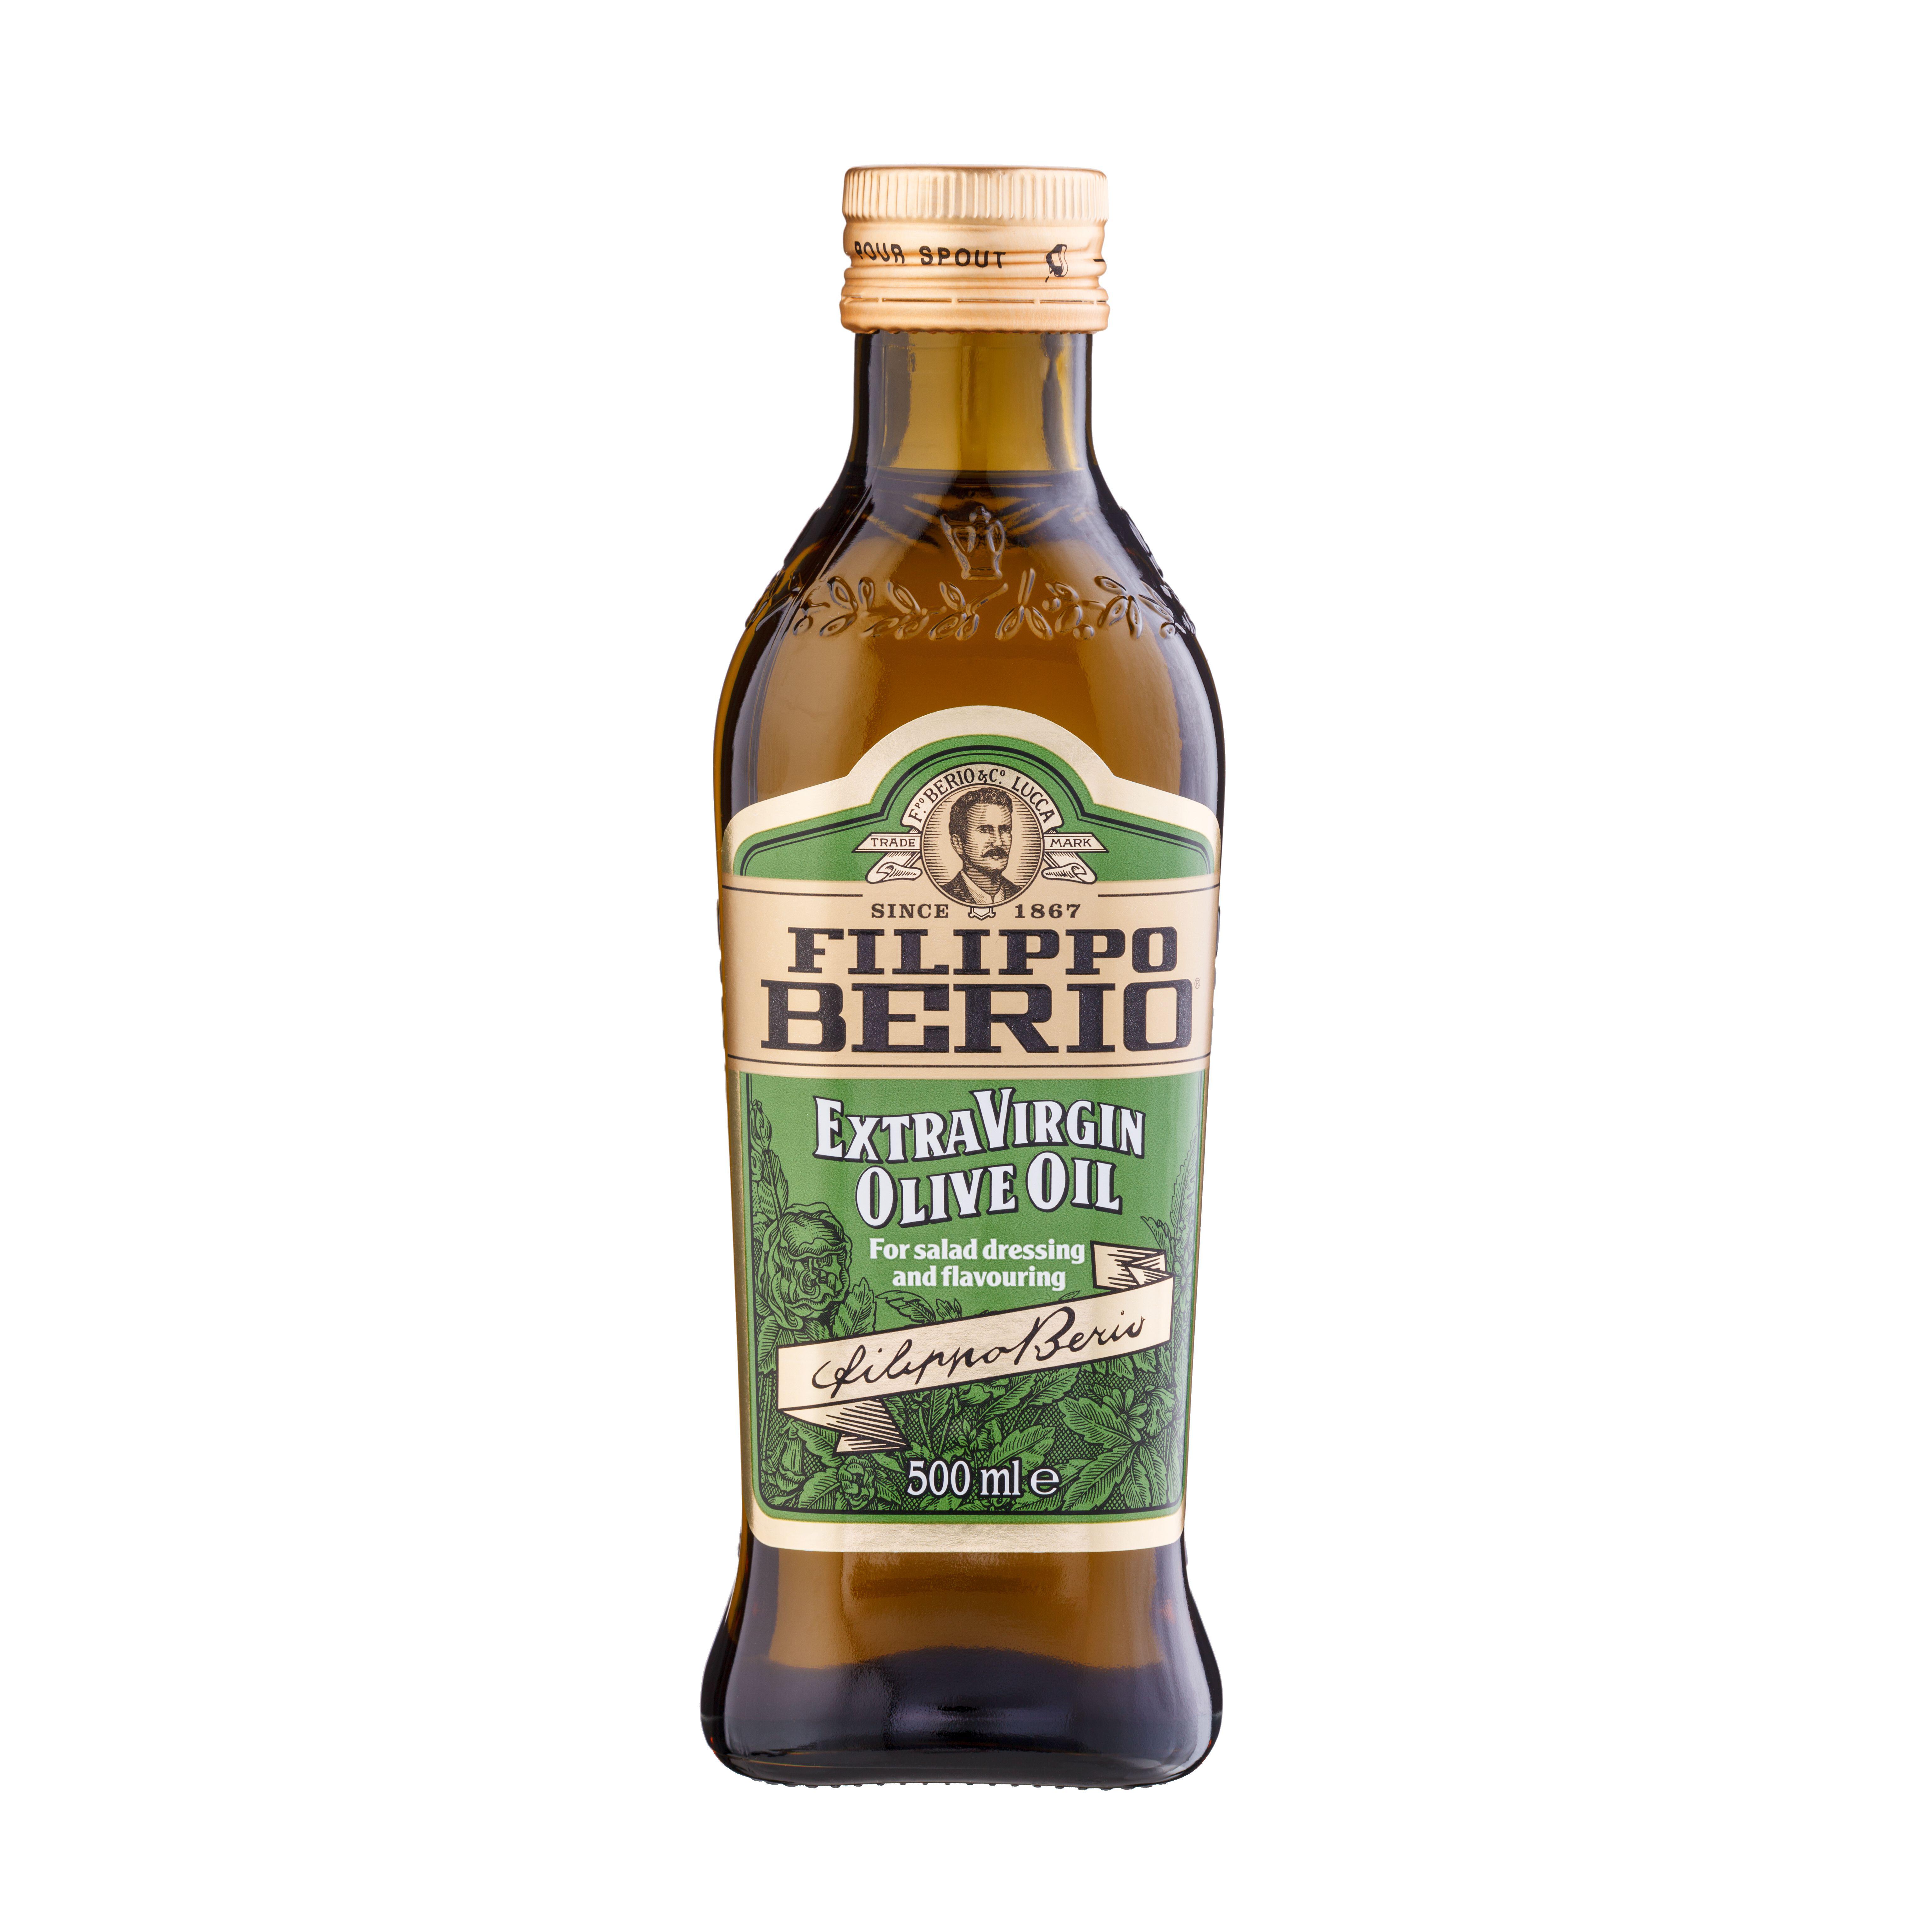 Filippo Berio now retails at over £13 a litre in some stores